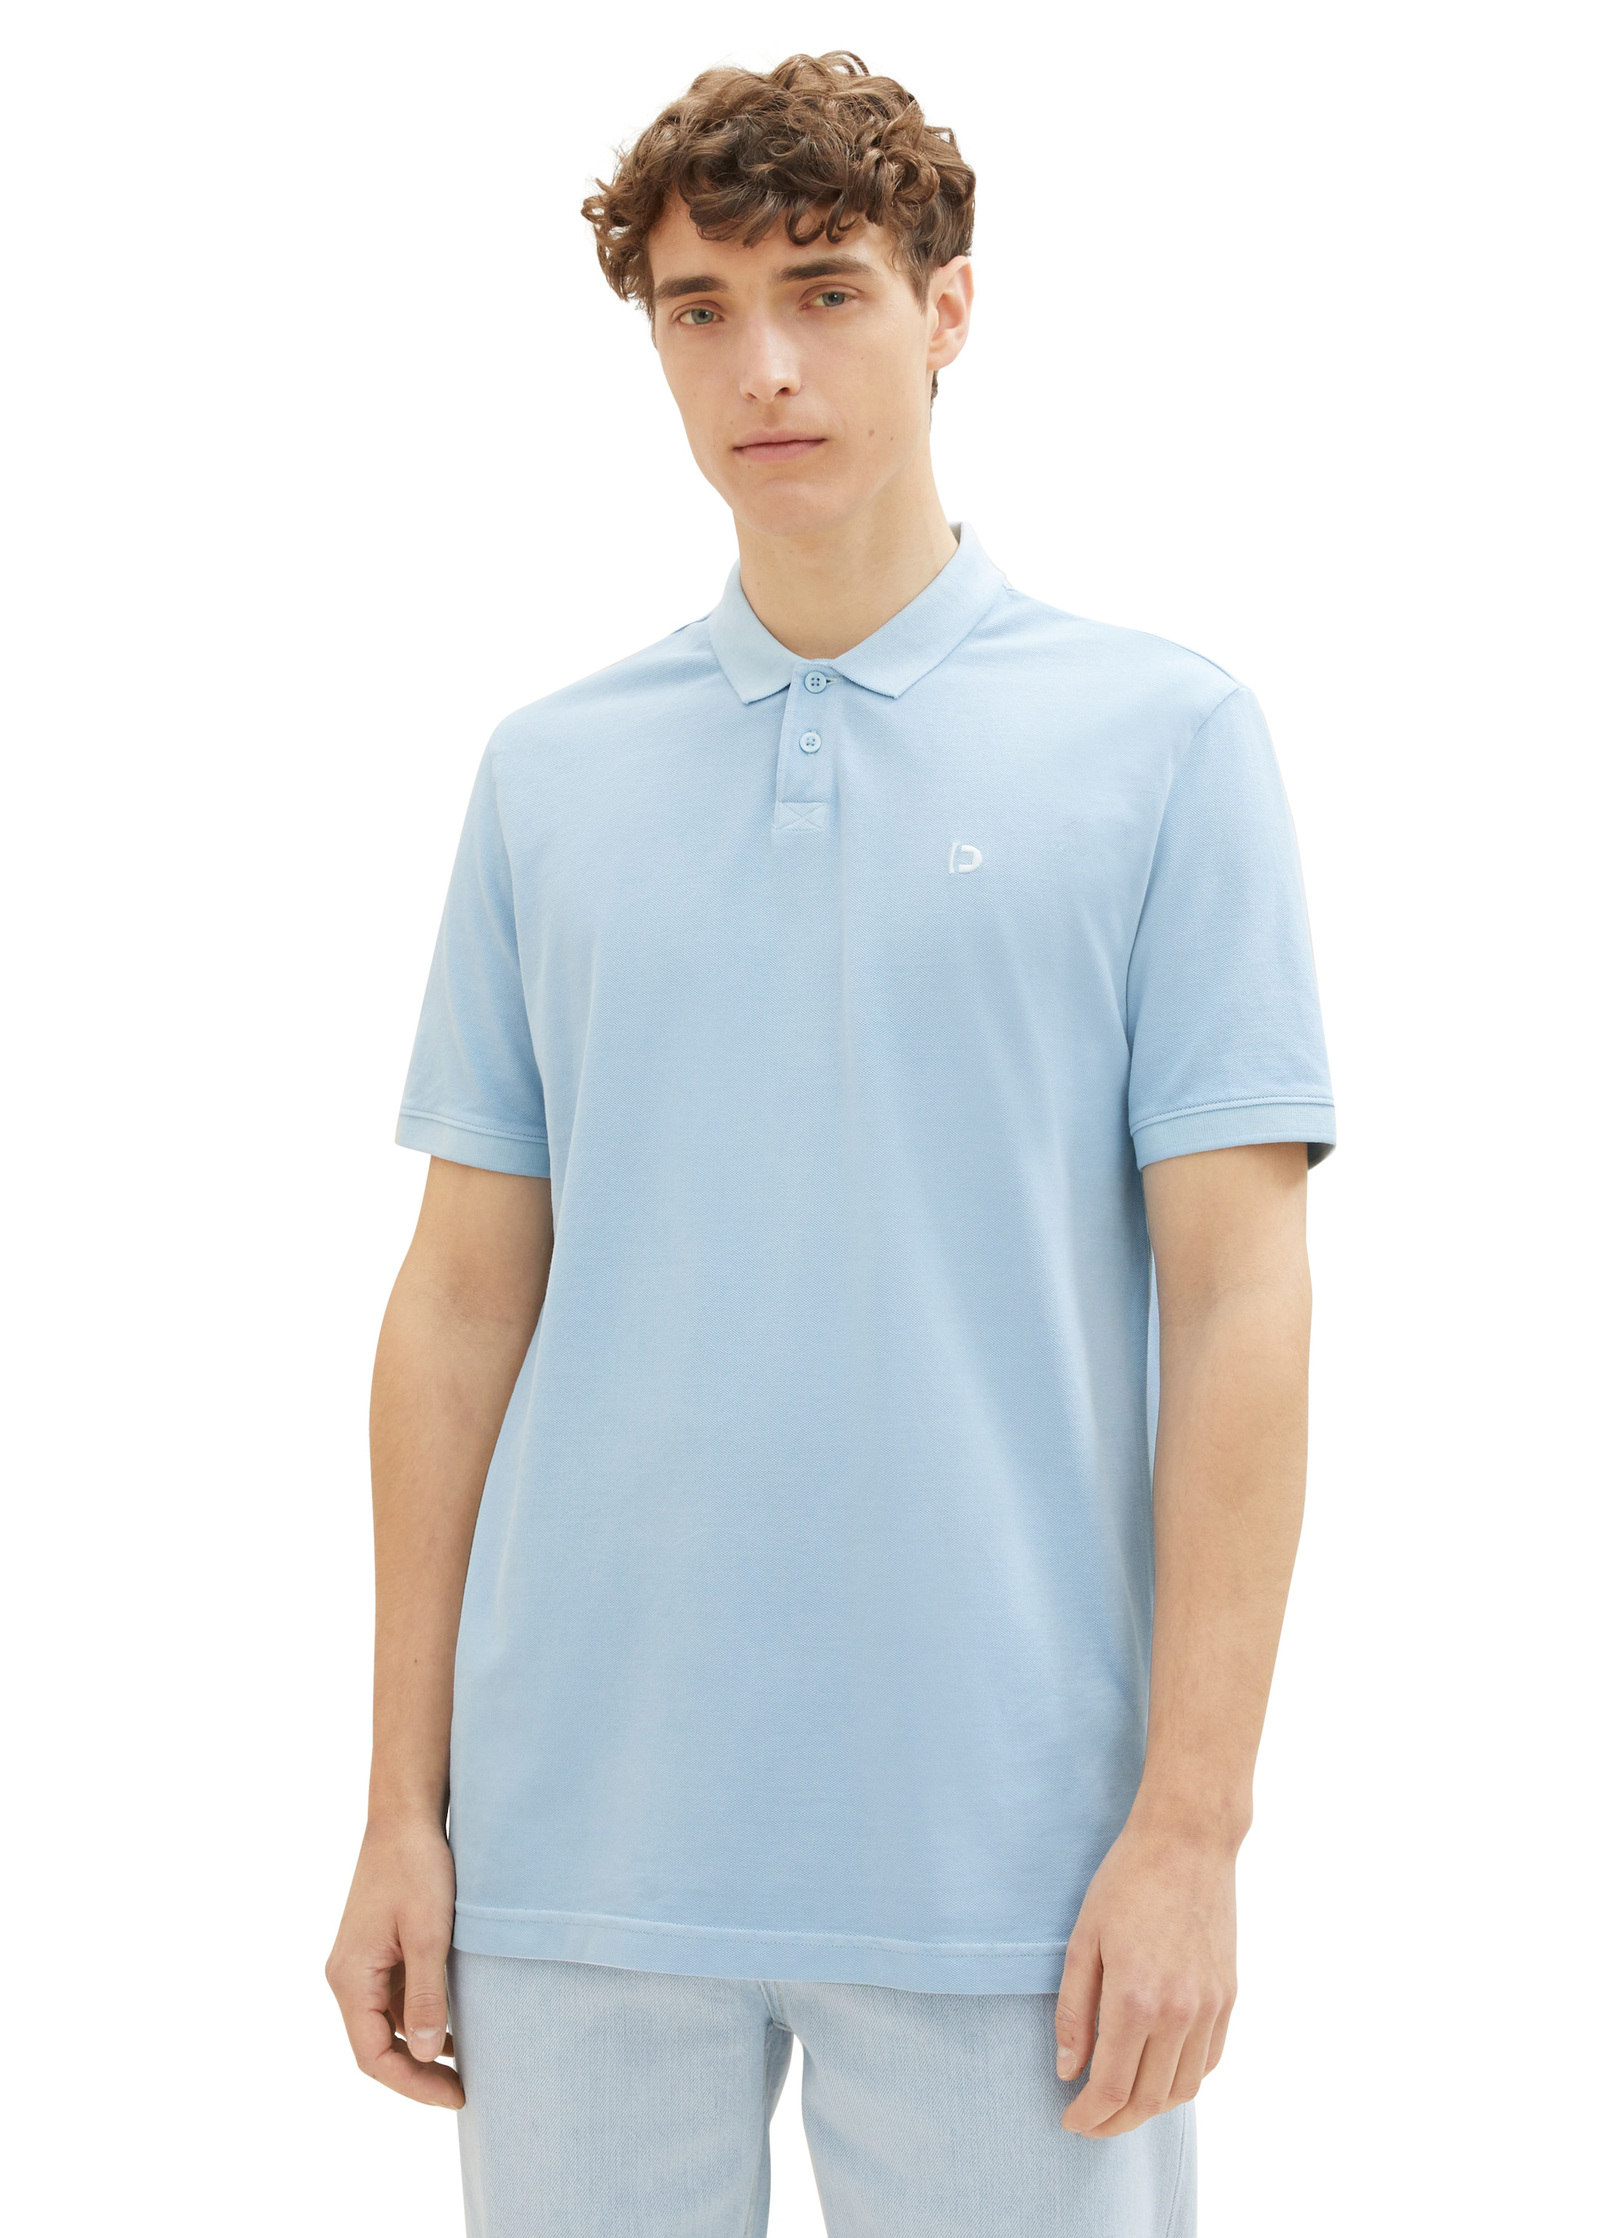 Tee Tailor® Polo Größe Tom Out Middle - XXL Washed Denim Blue